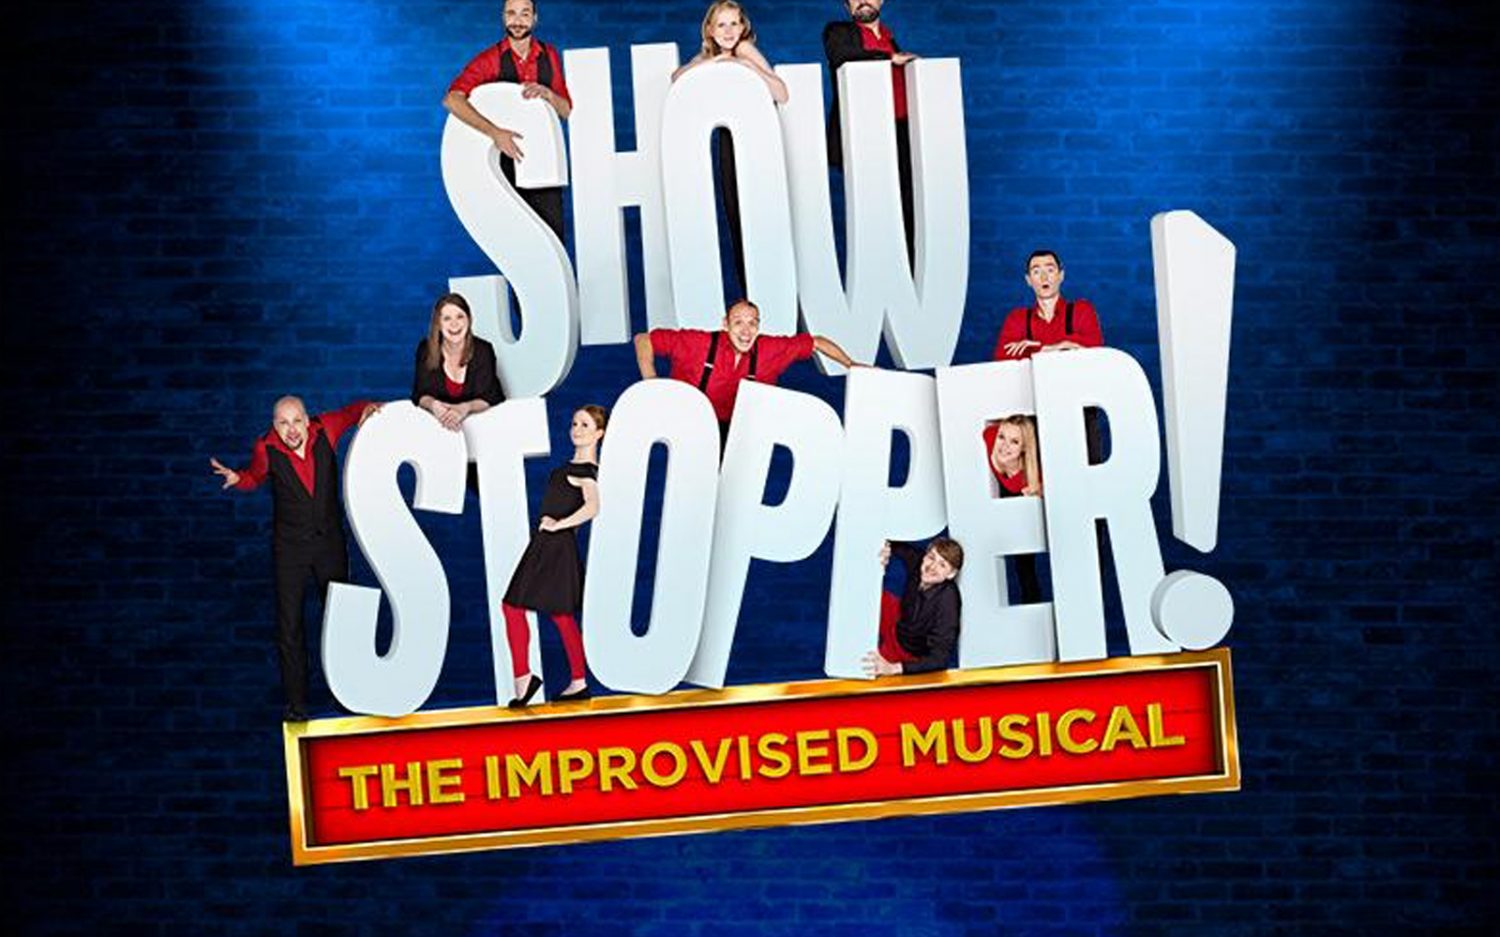 Showstopper the improvised musical!